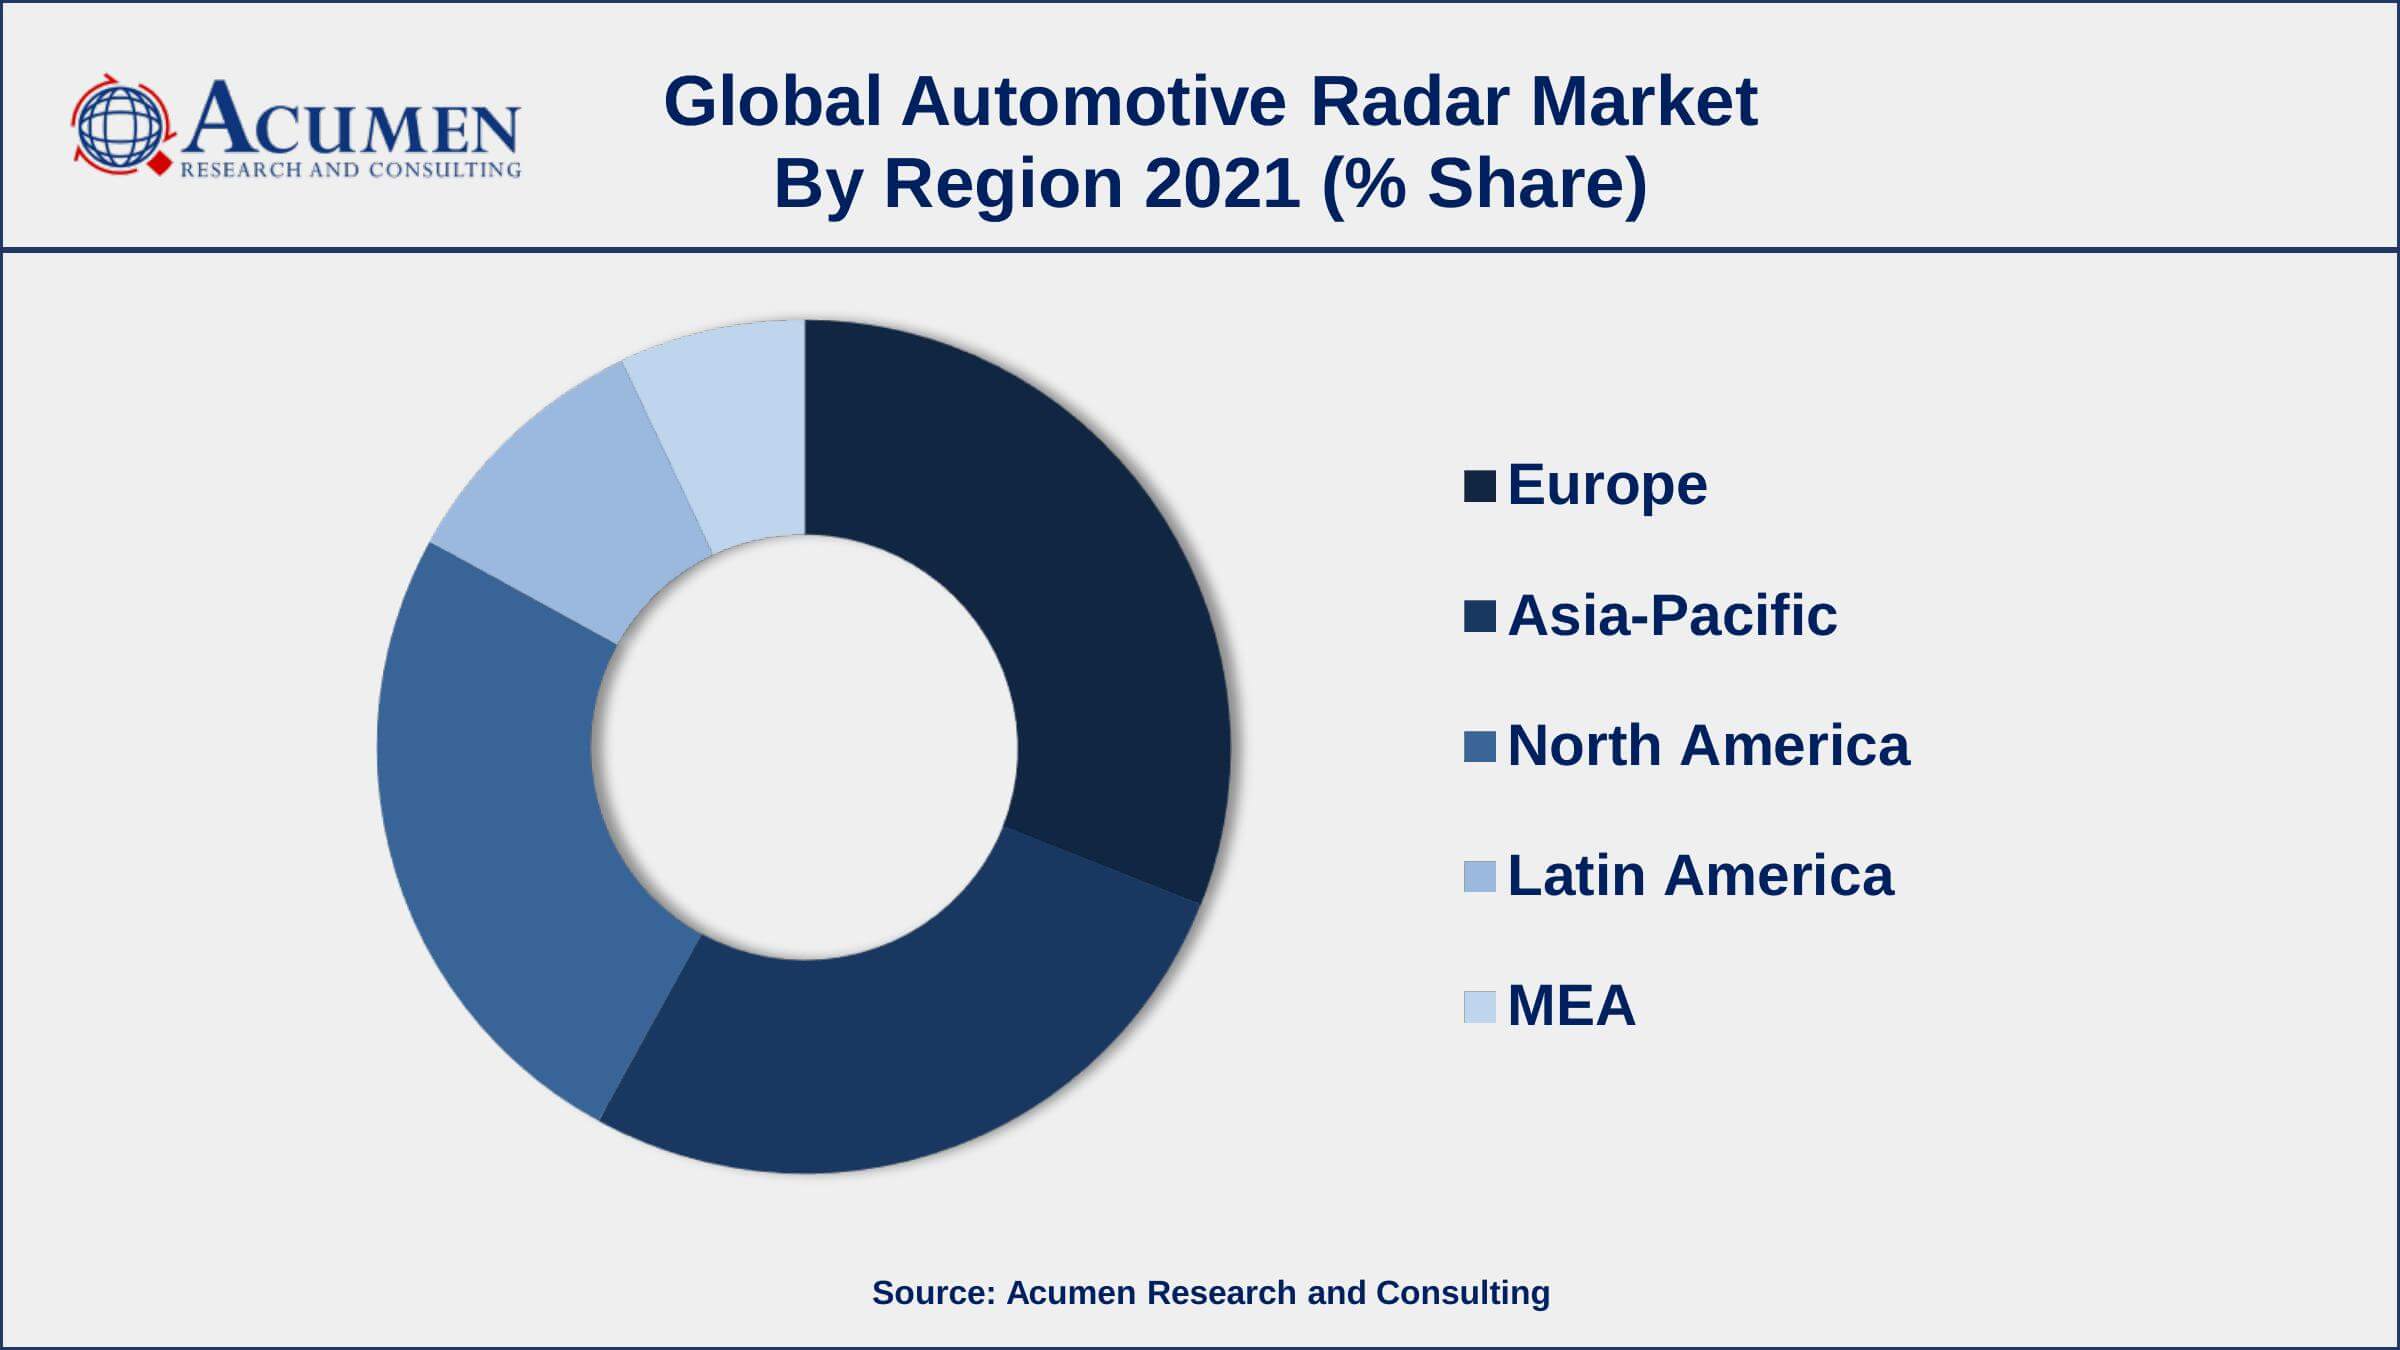 Increasing number of road accidents and fatalities, drives the automotive radar market size